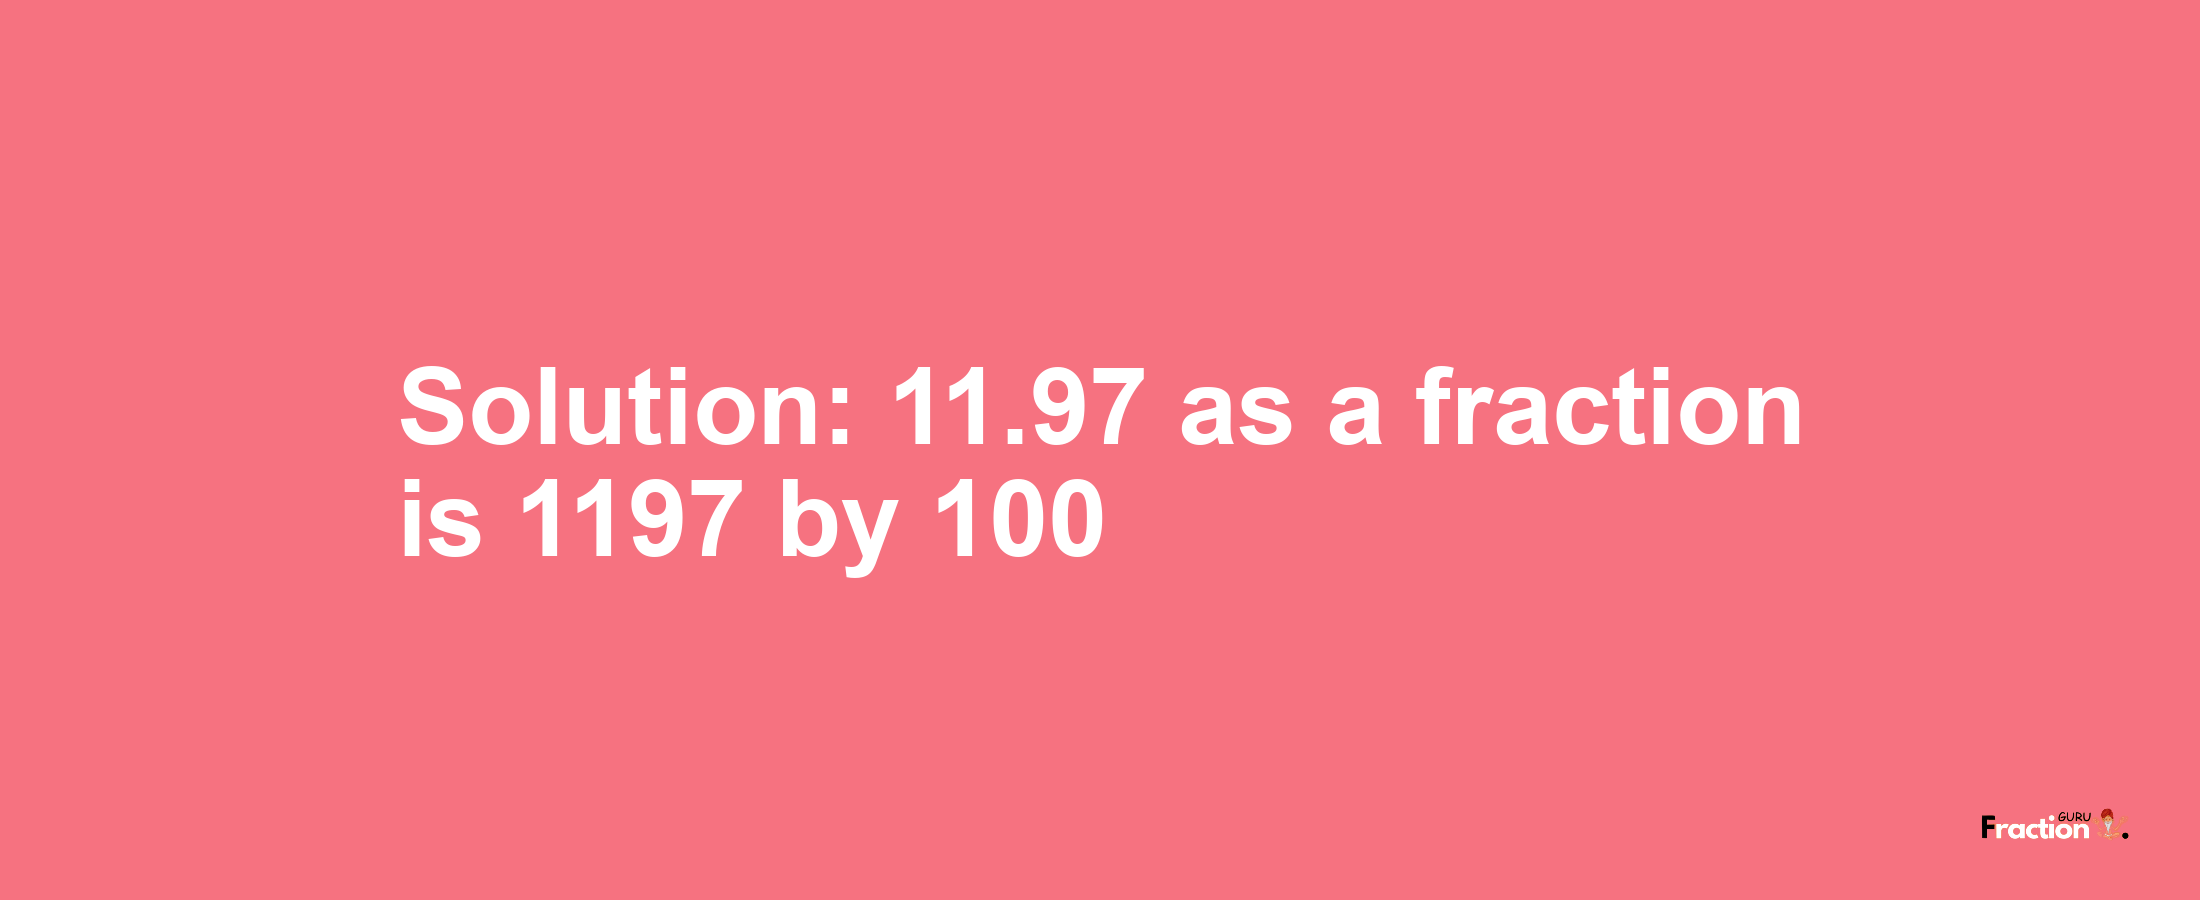 Solution:11.97 as a fraction is 1197/100